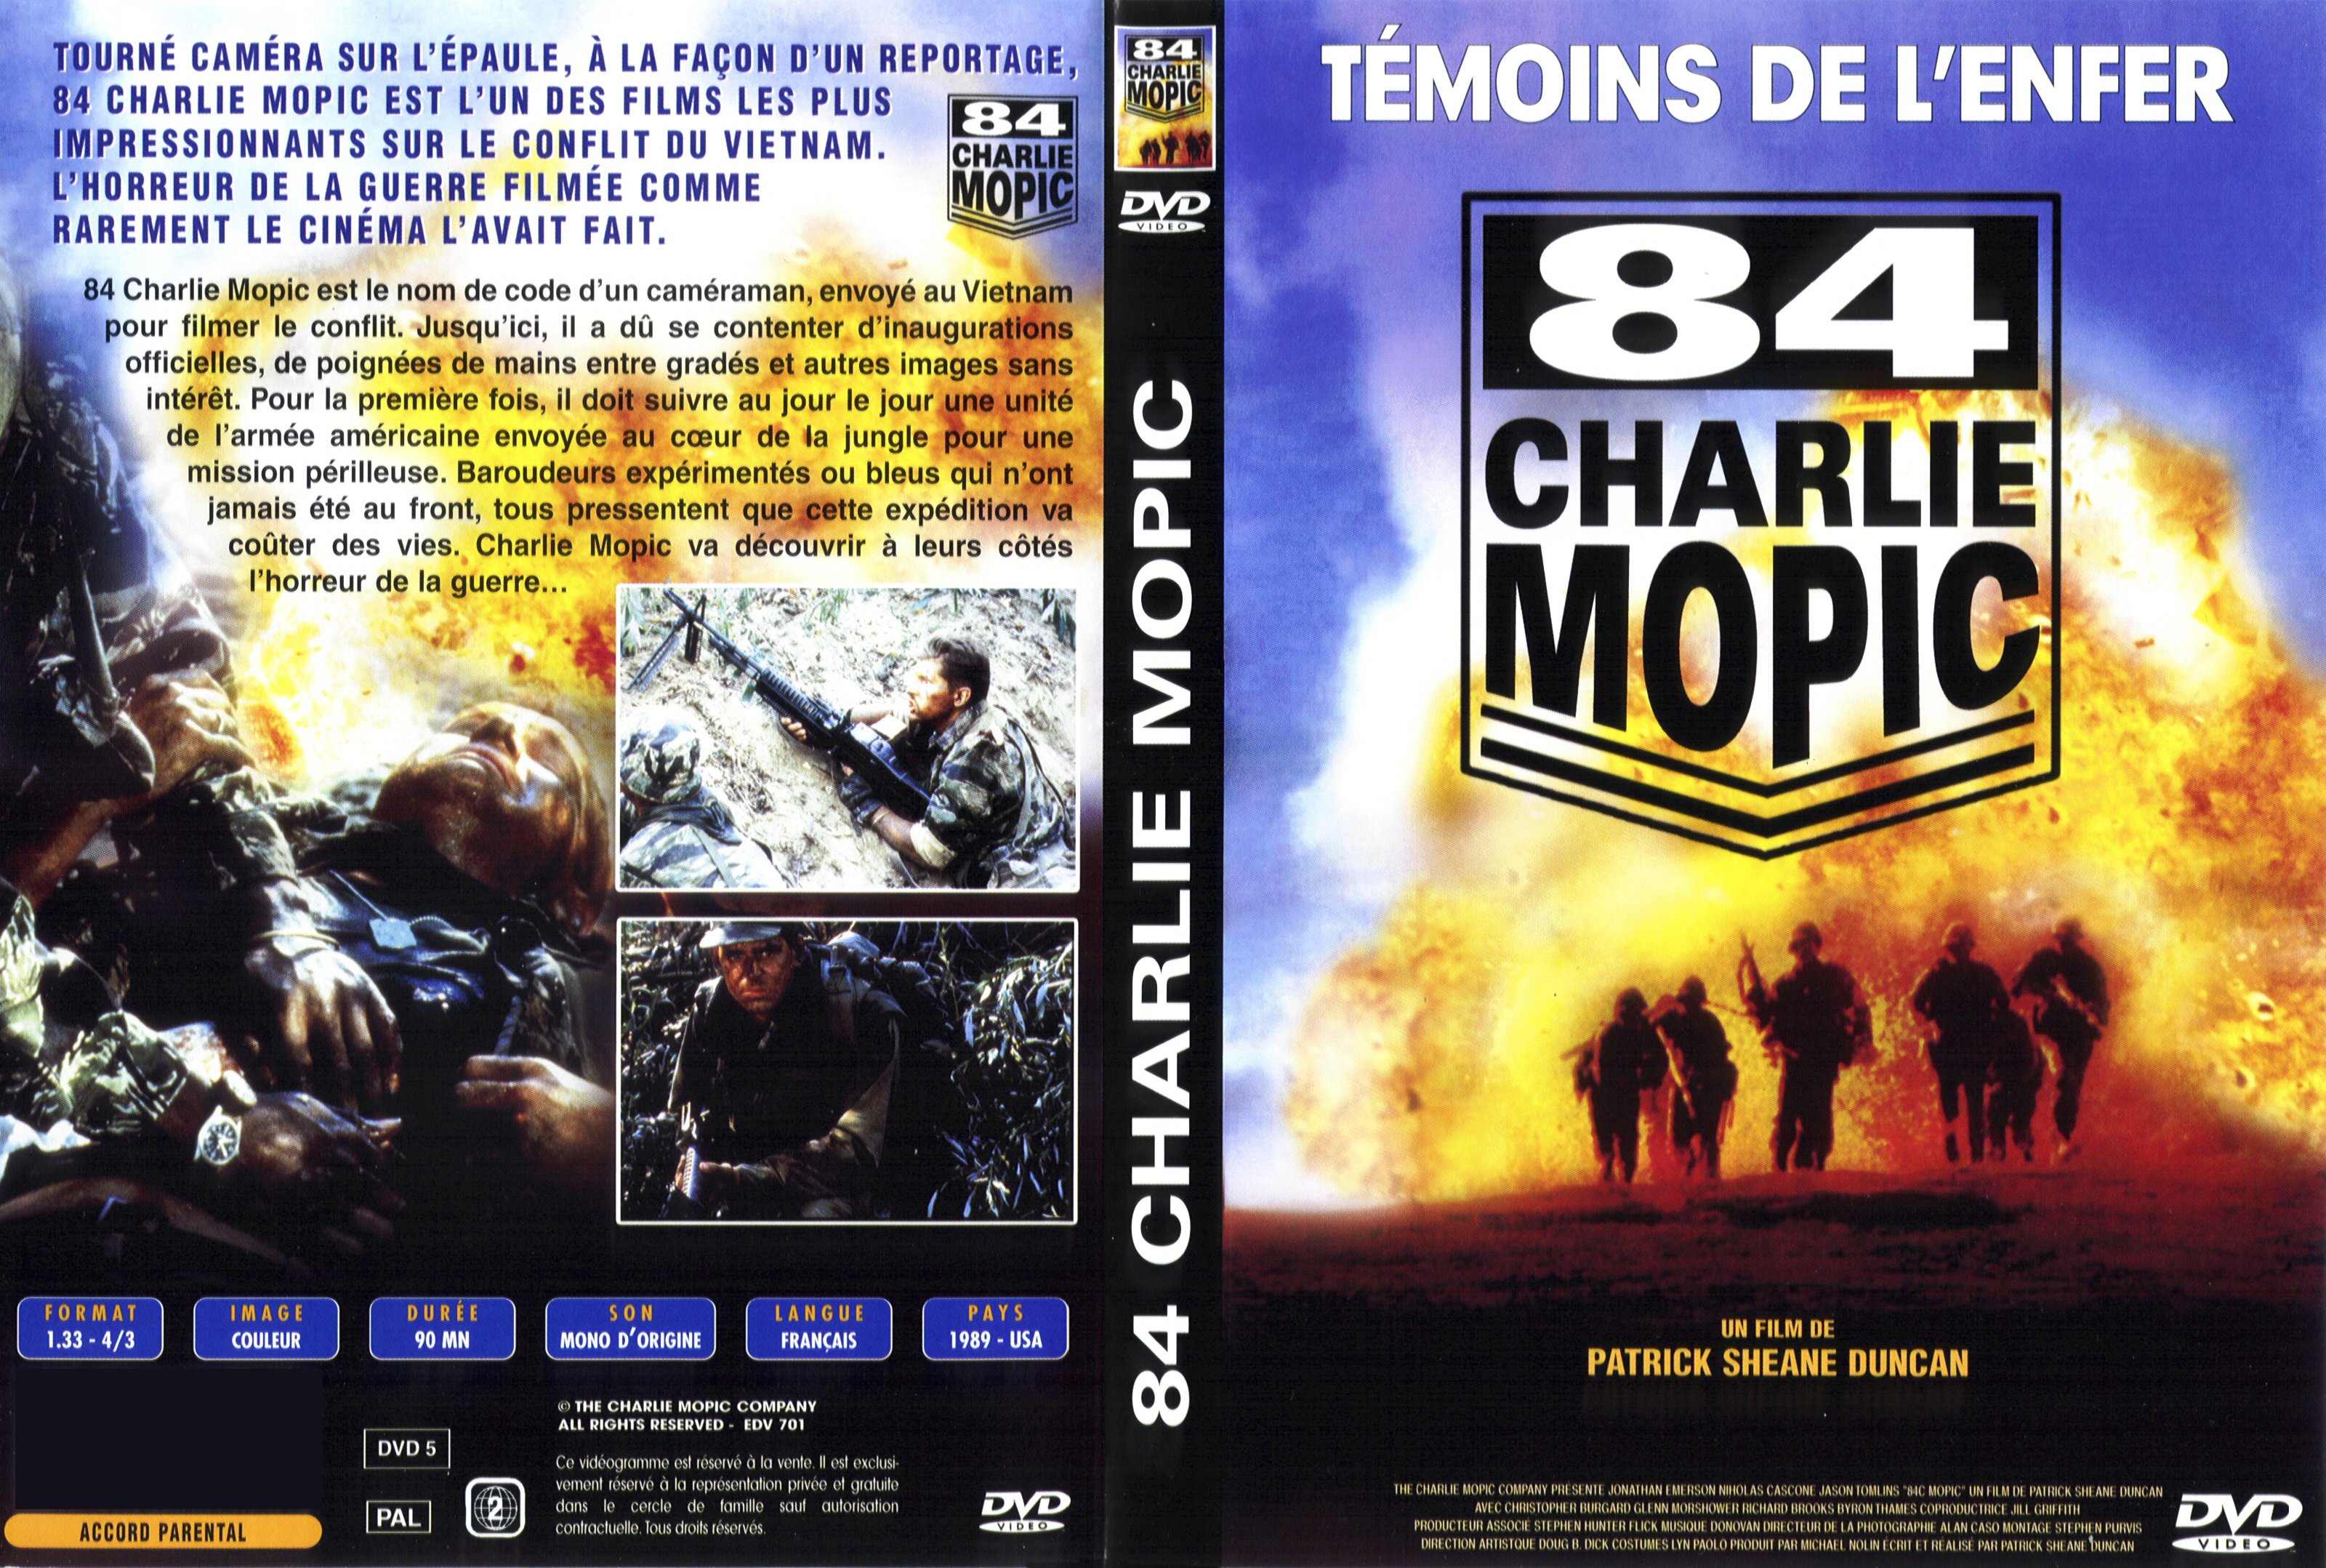 Jaquette DVD 84 charlie mopic